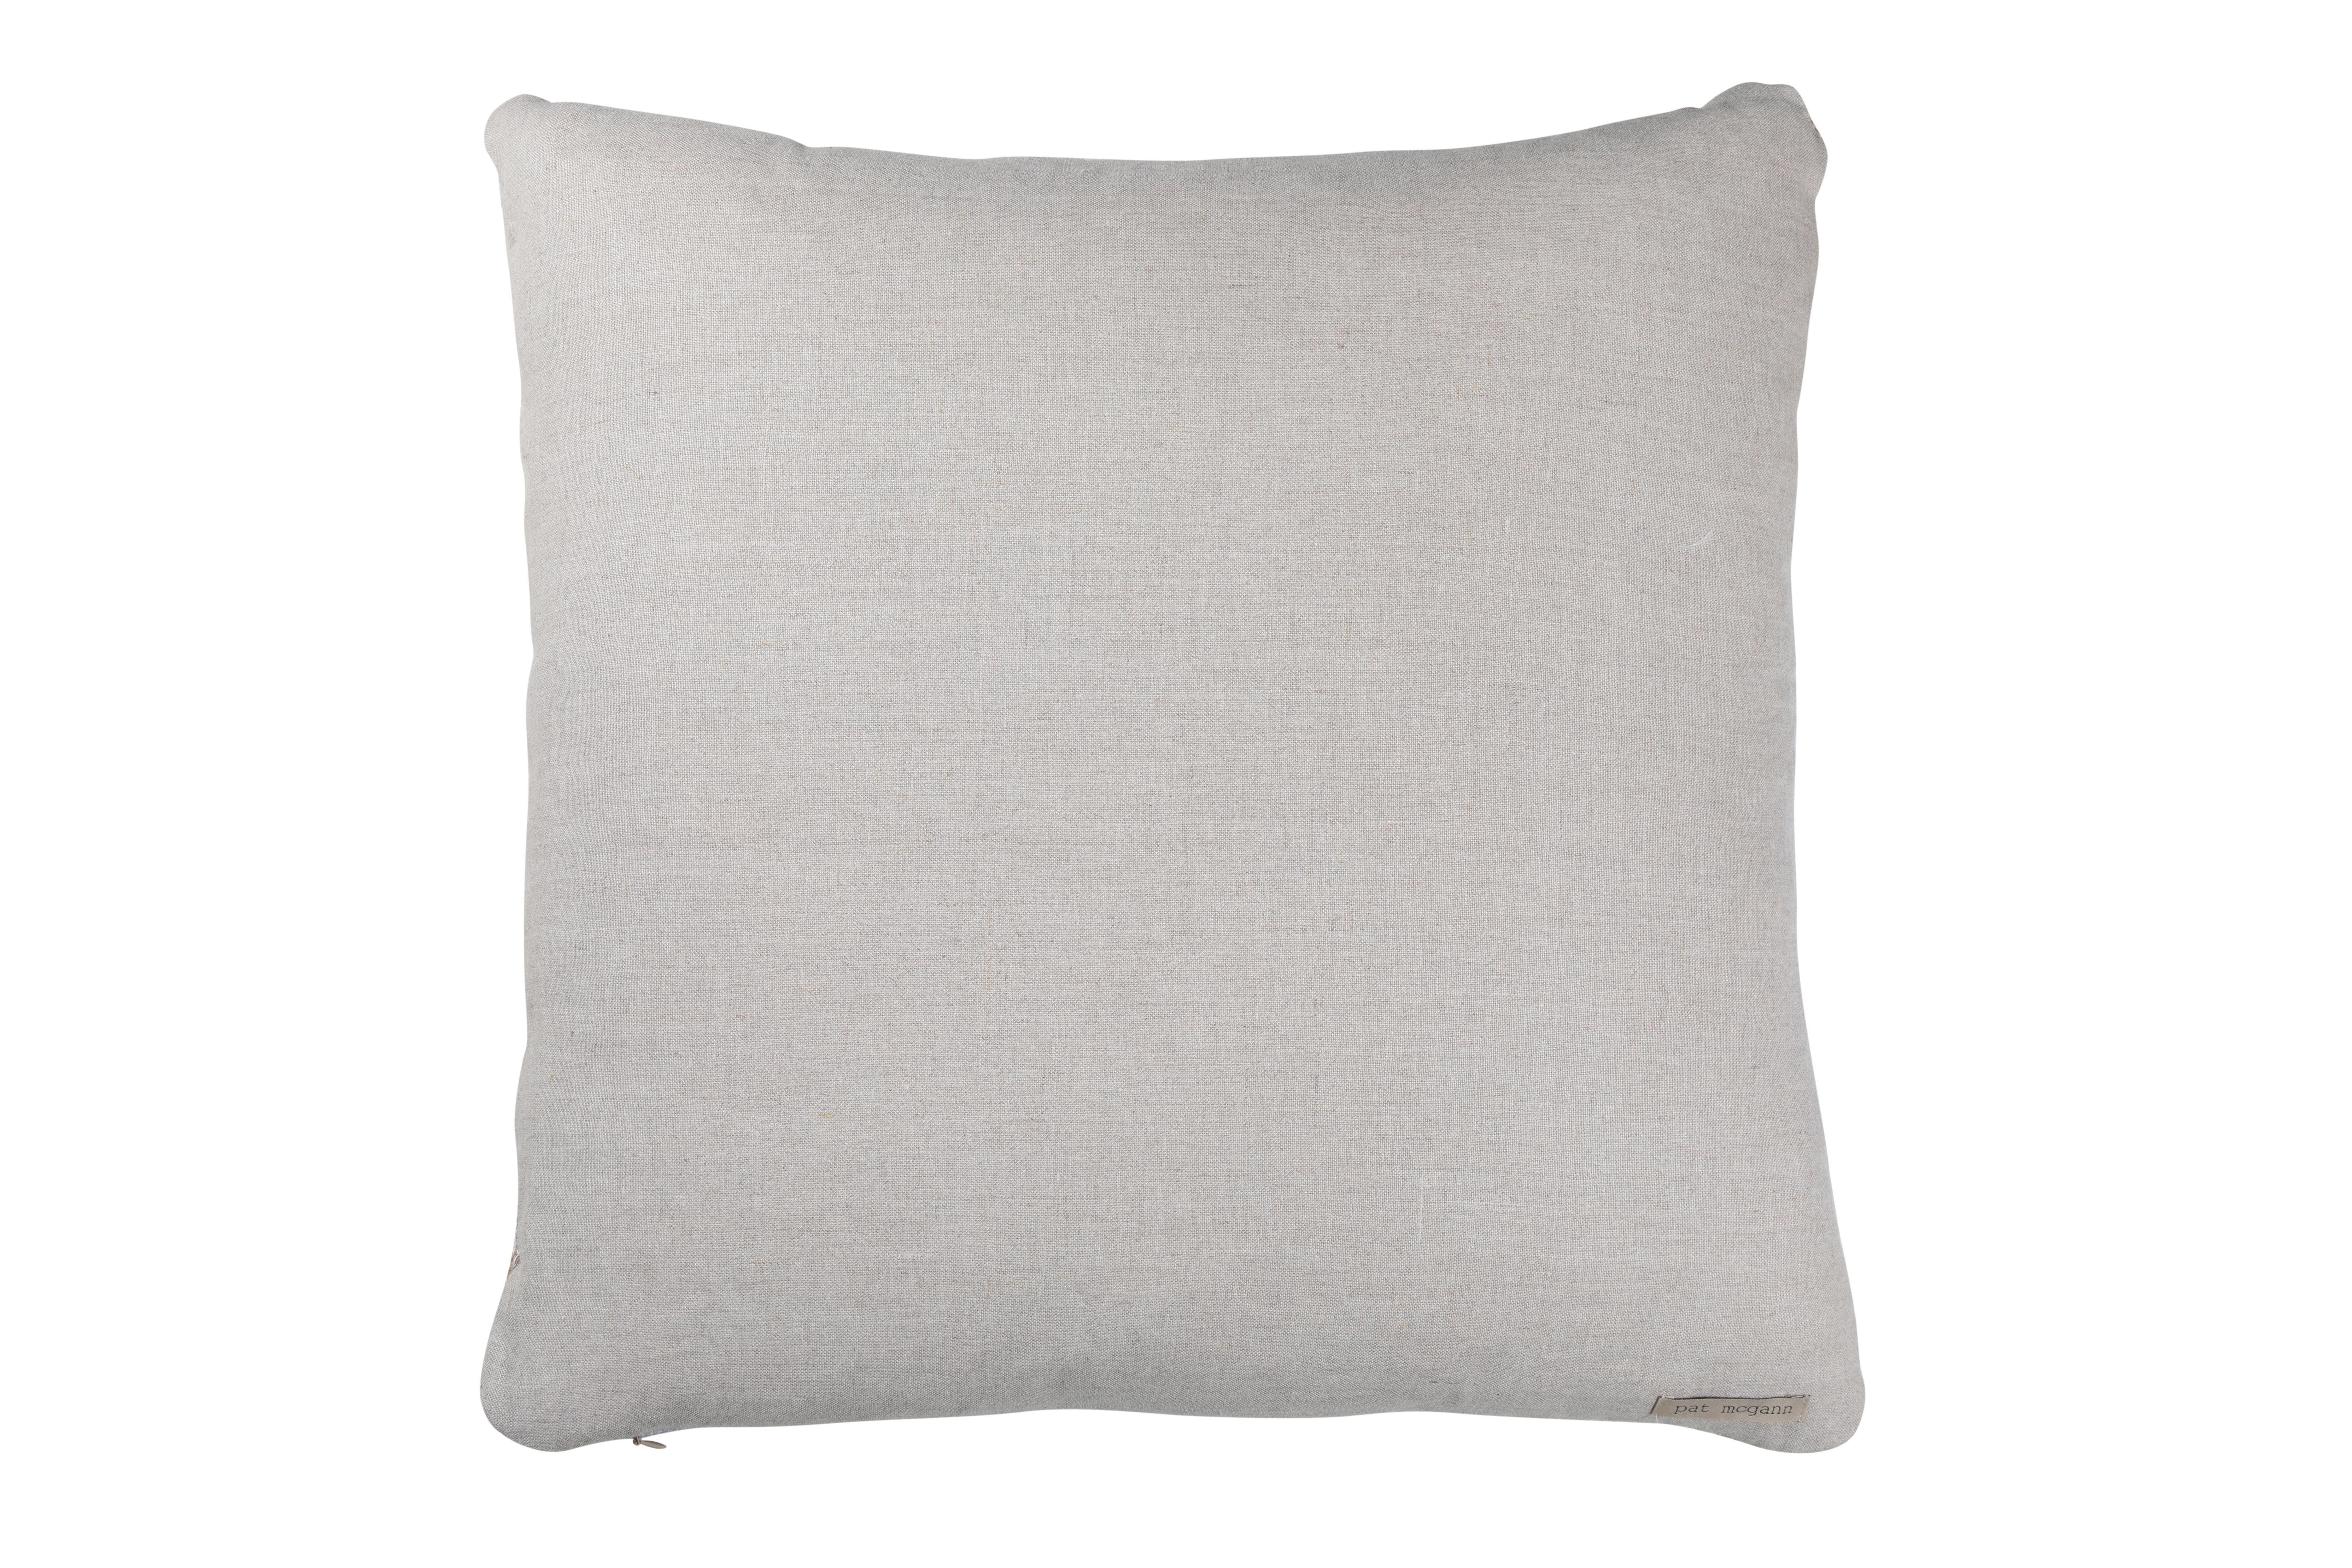 A contemporary line of cushions, pillows, throws, bedcovers, bedspreads and yardage hand woven in India on antique Jacquard looms. Hand spun wool, cotton, linen, and raw silk give the textiles an appealing uneven quality. 

This wool and raw